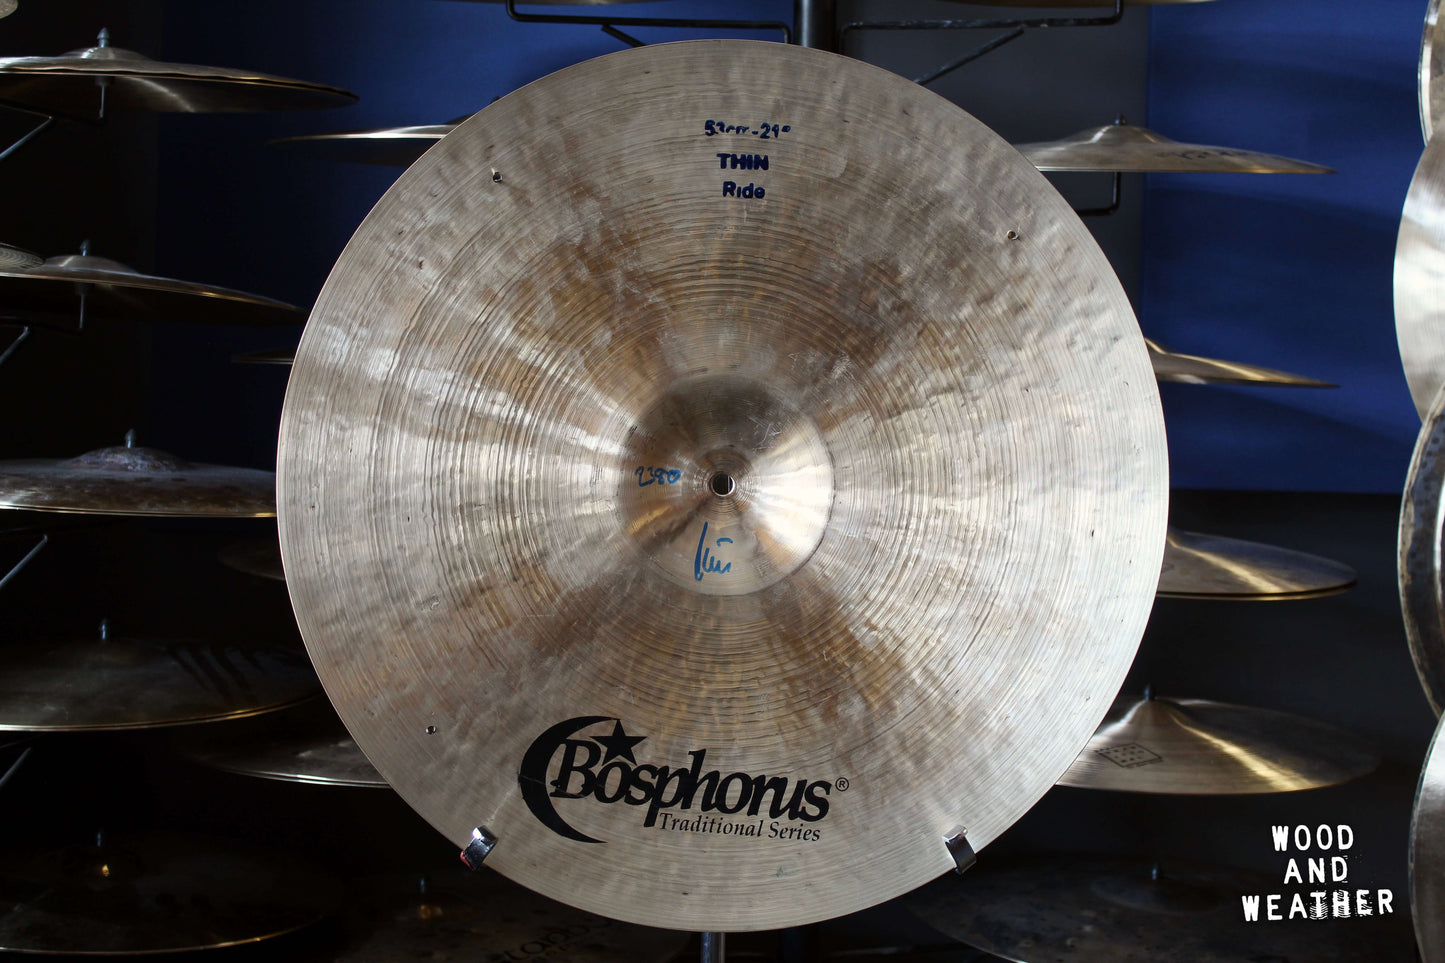 Used Bosphorus 21" Traditional Series Thin Ride Cymbal w/ Rivets 2380g